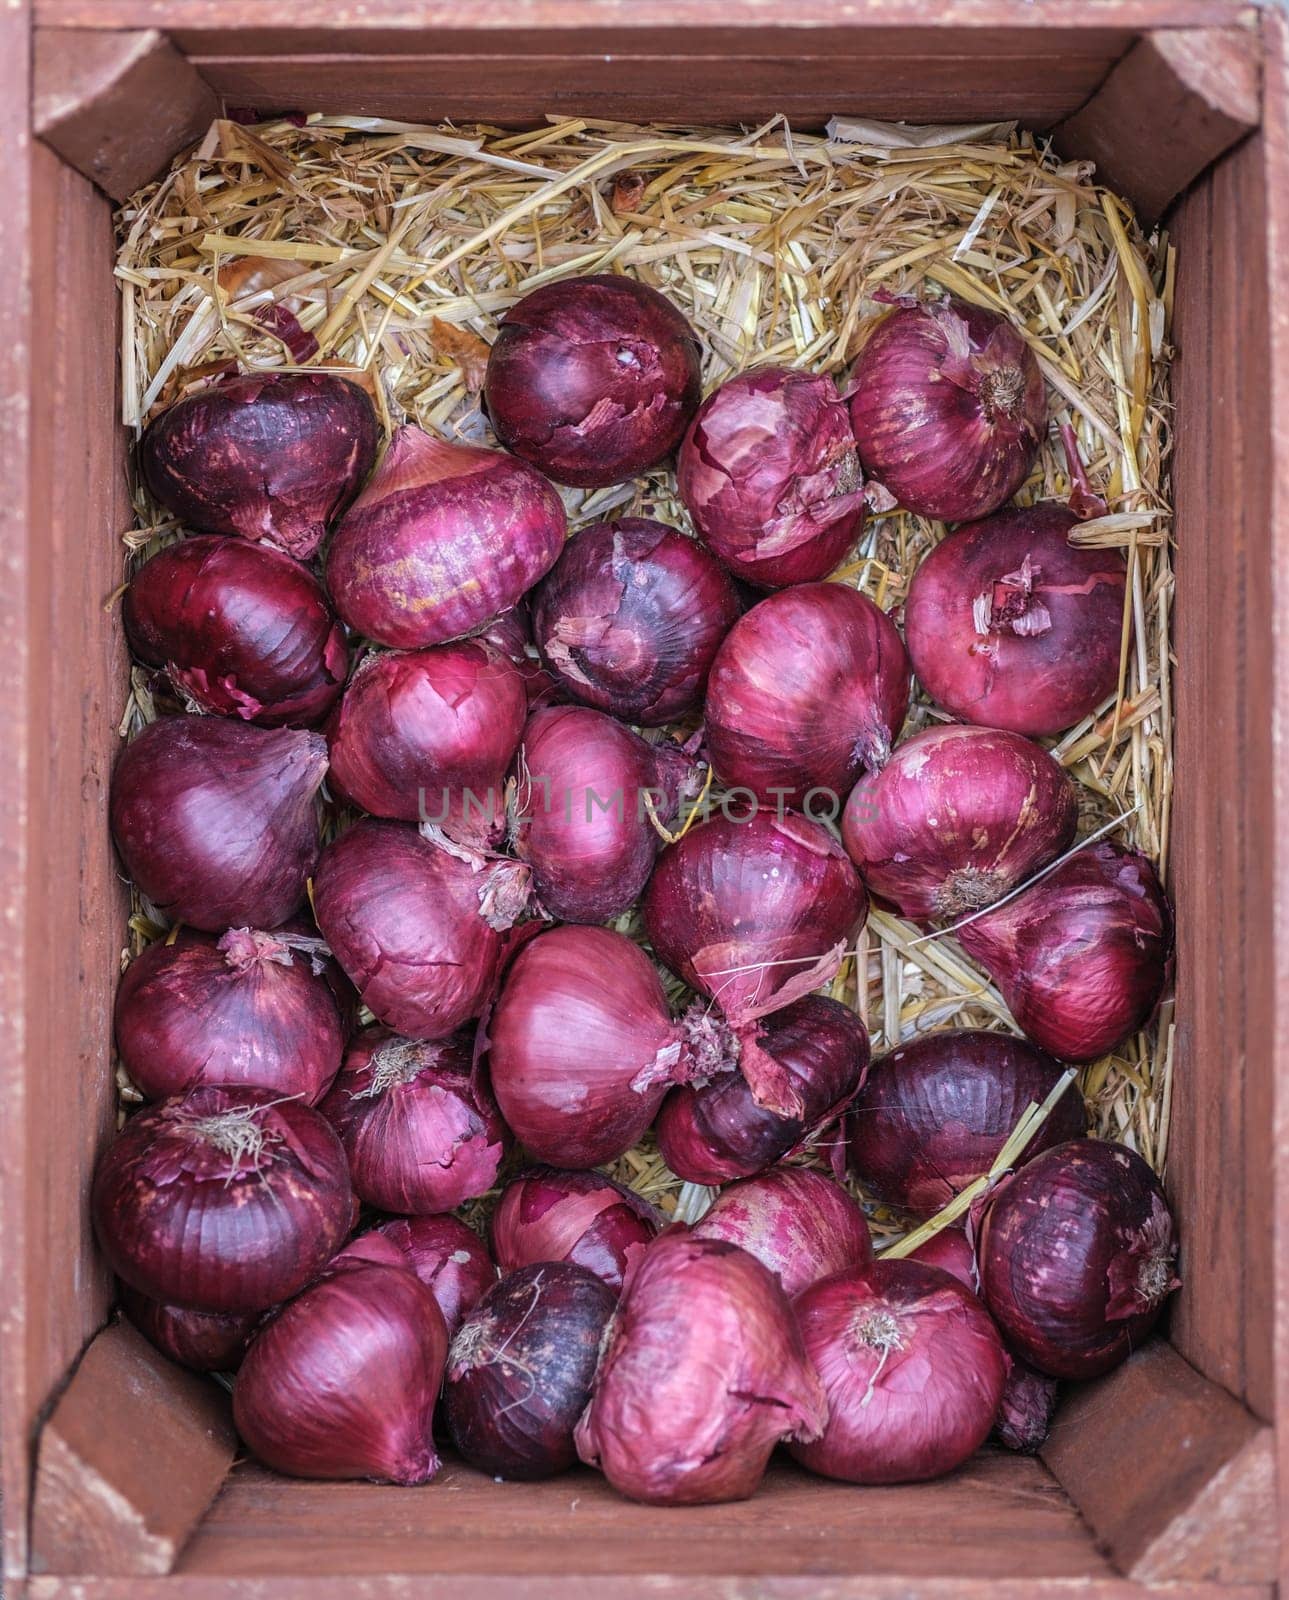 A Box Of Organic Red Onions At A Market